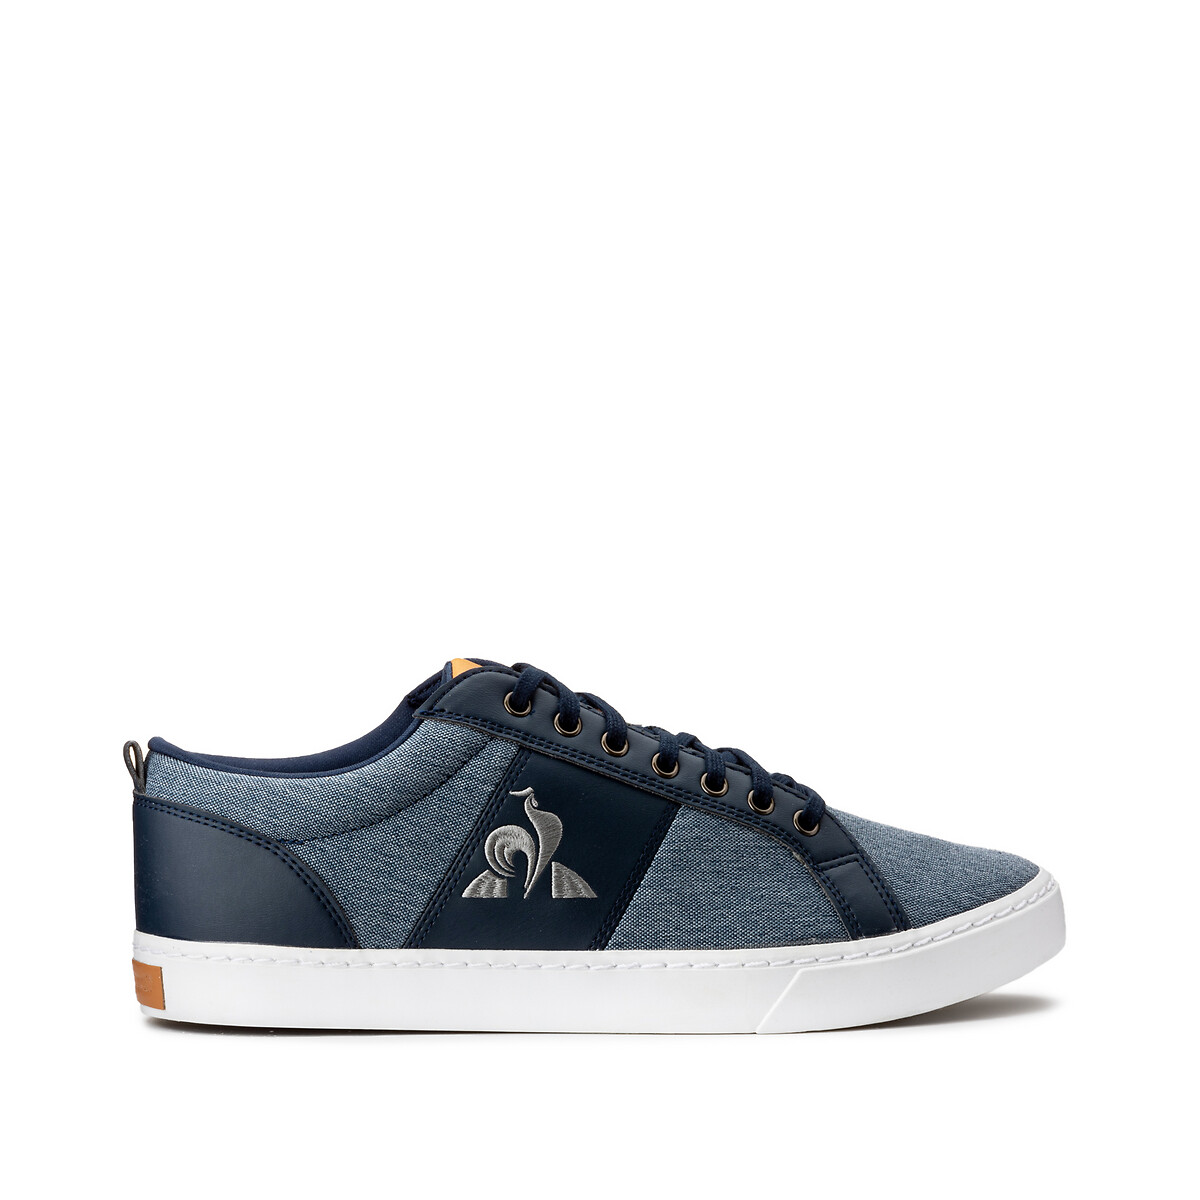 coq sportif chaussure homme 2017